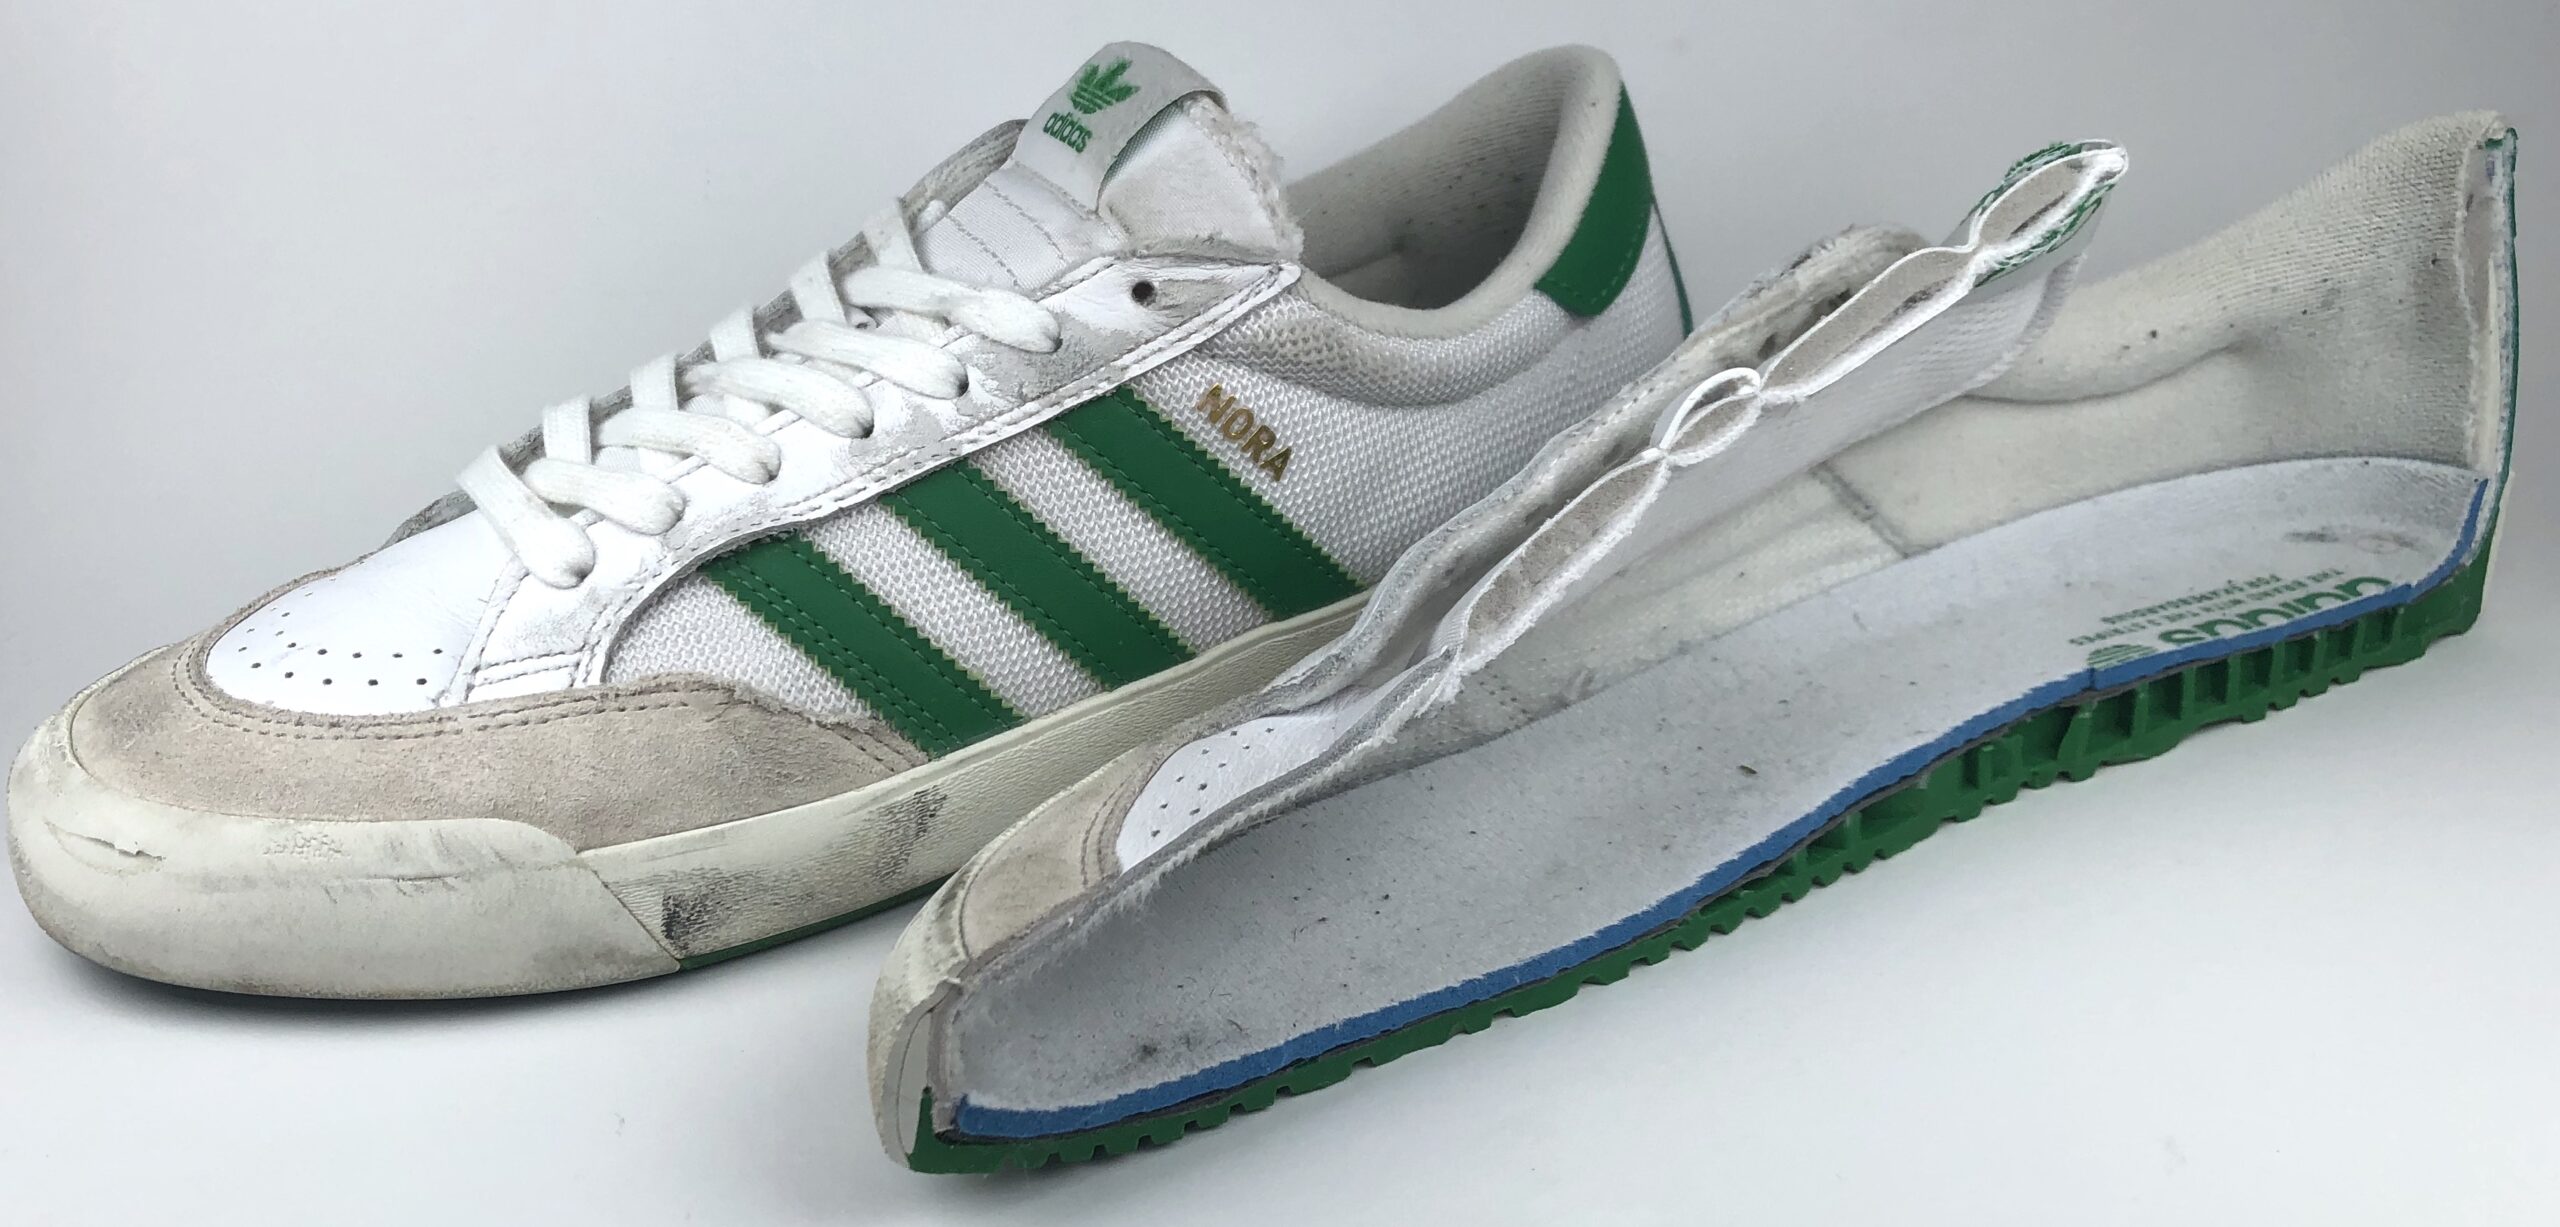 Adidas Archives - - detailed skate shoe reviews